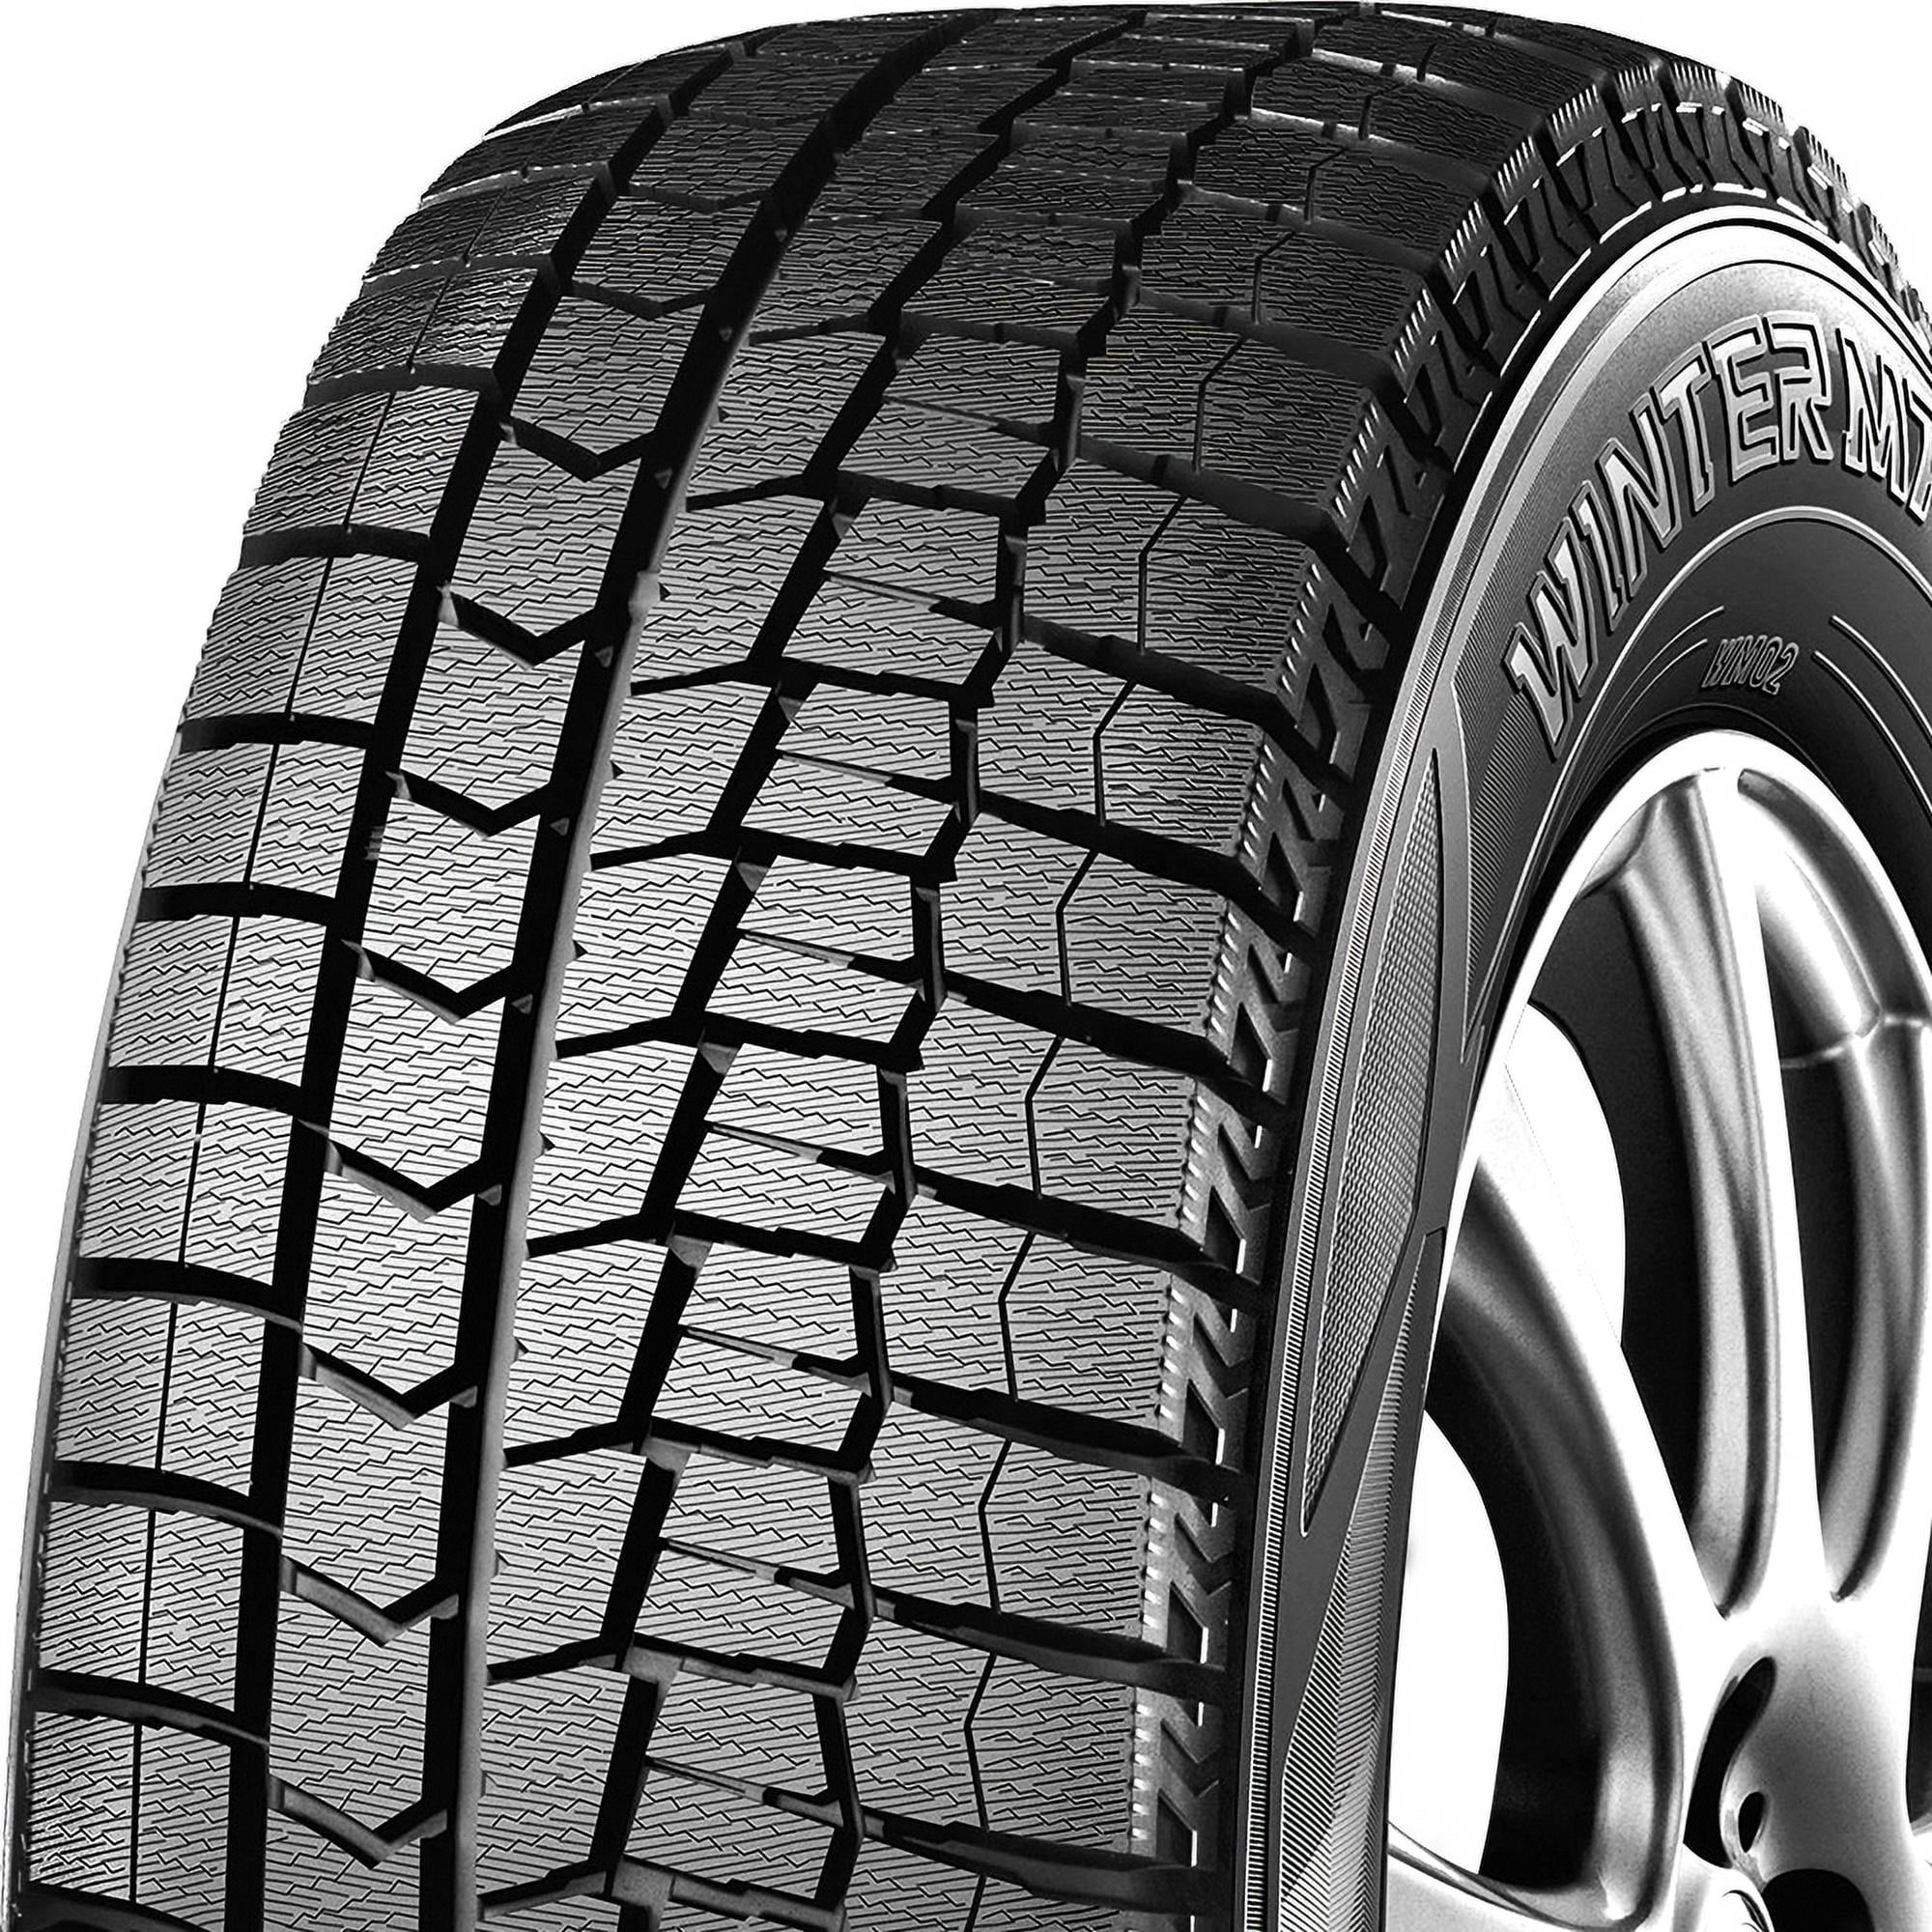 One New Dunlop Winter Maxx 2 175/65R14 82T (Studless) Snow Tire